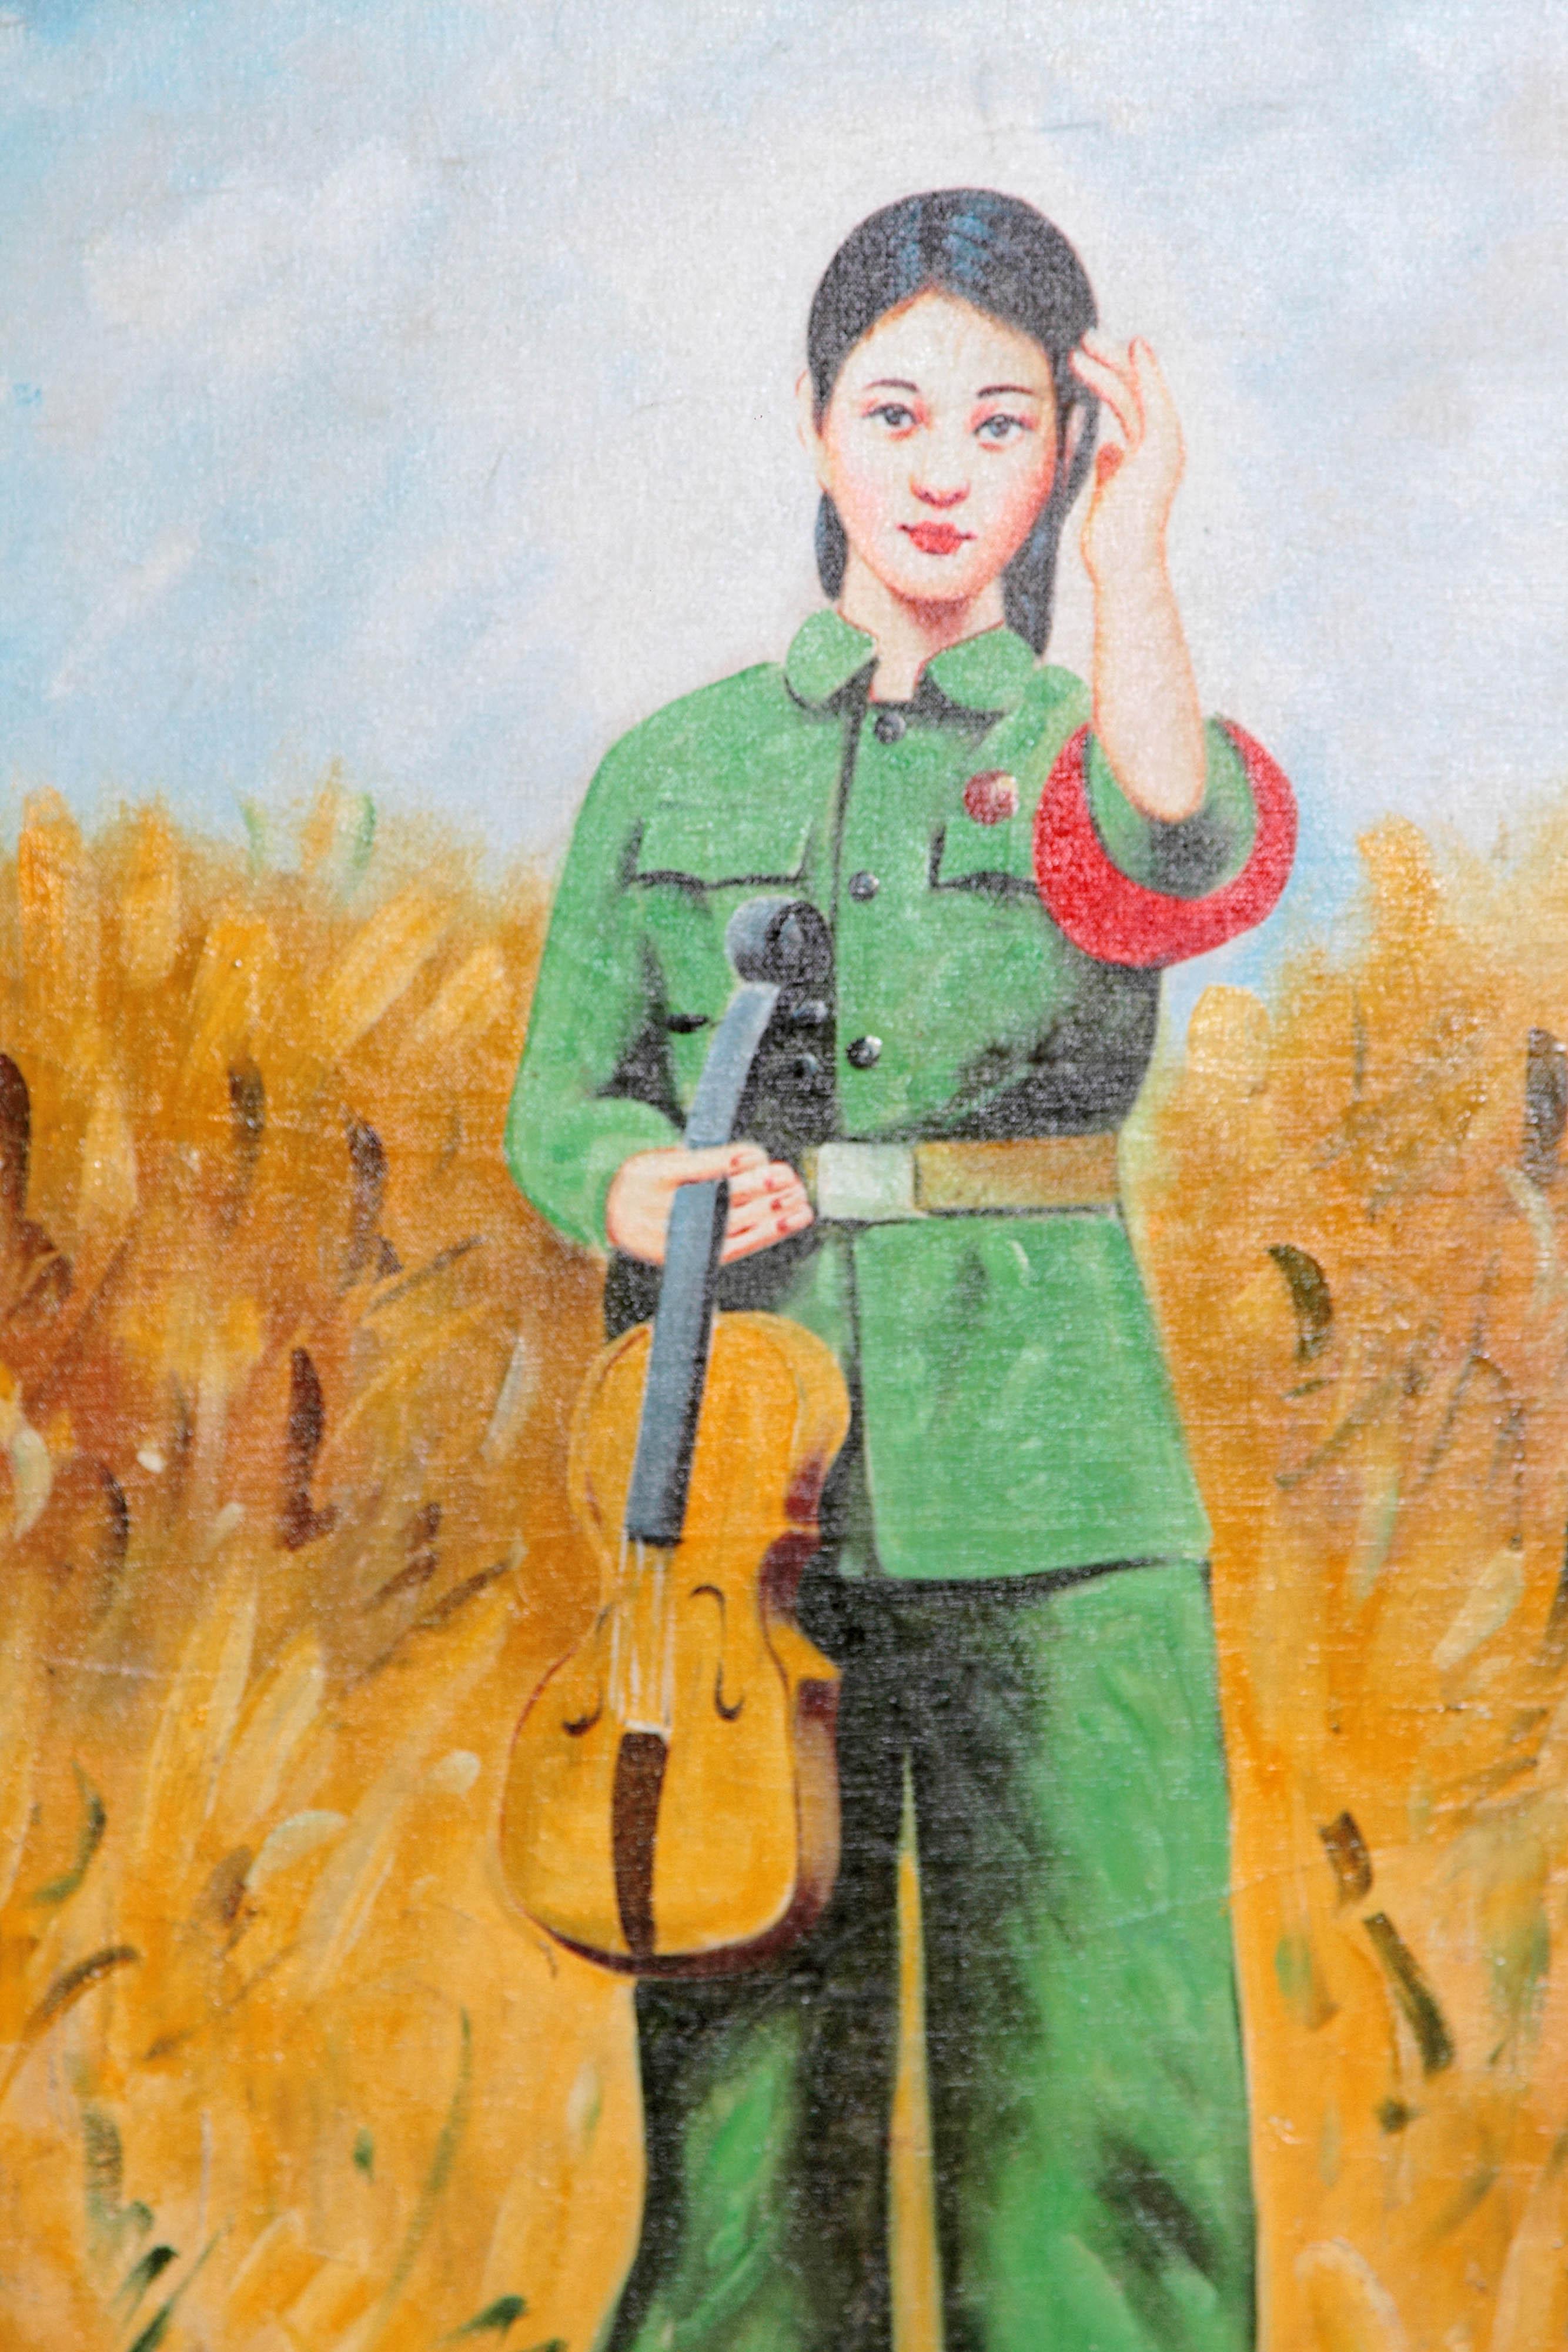 A rare and realistic oil on canvas from China's Cultural Revolution. Signed and dated 1974.